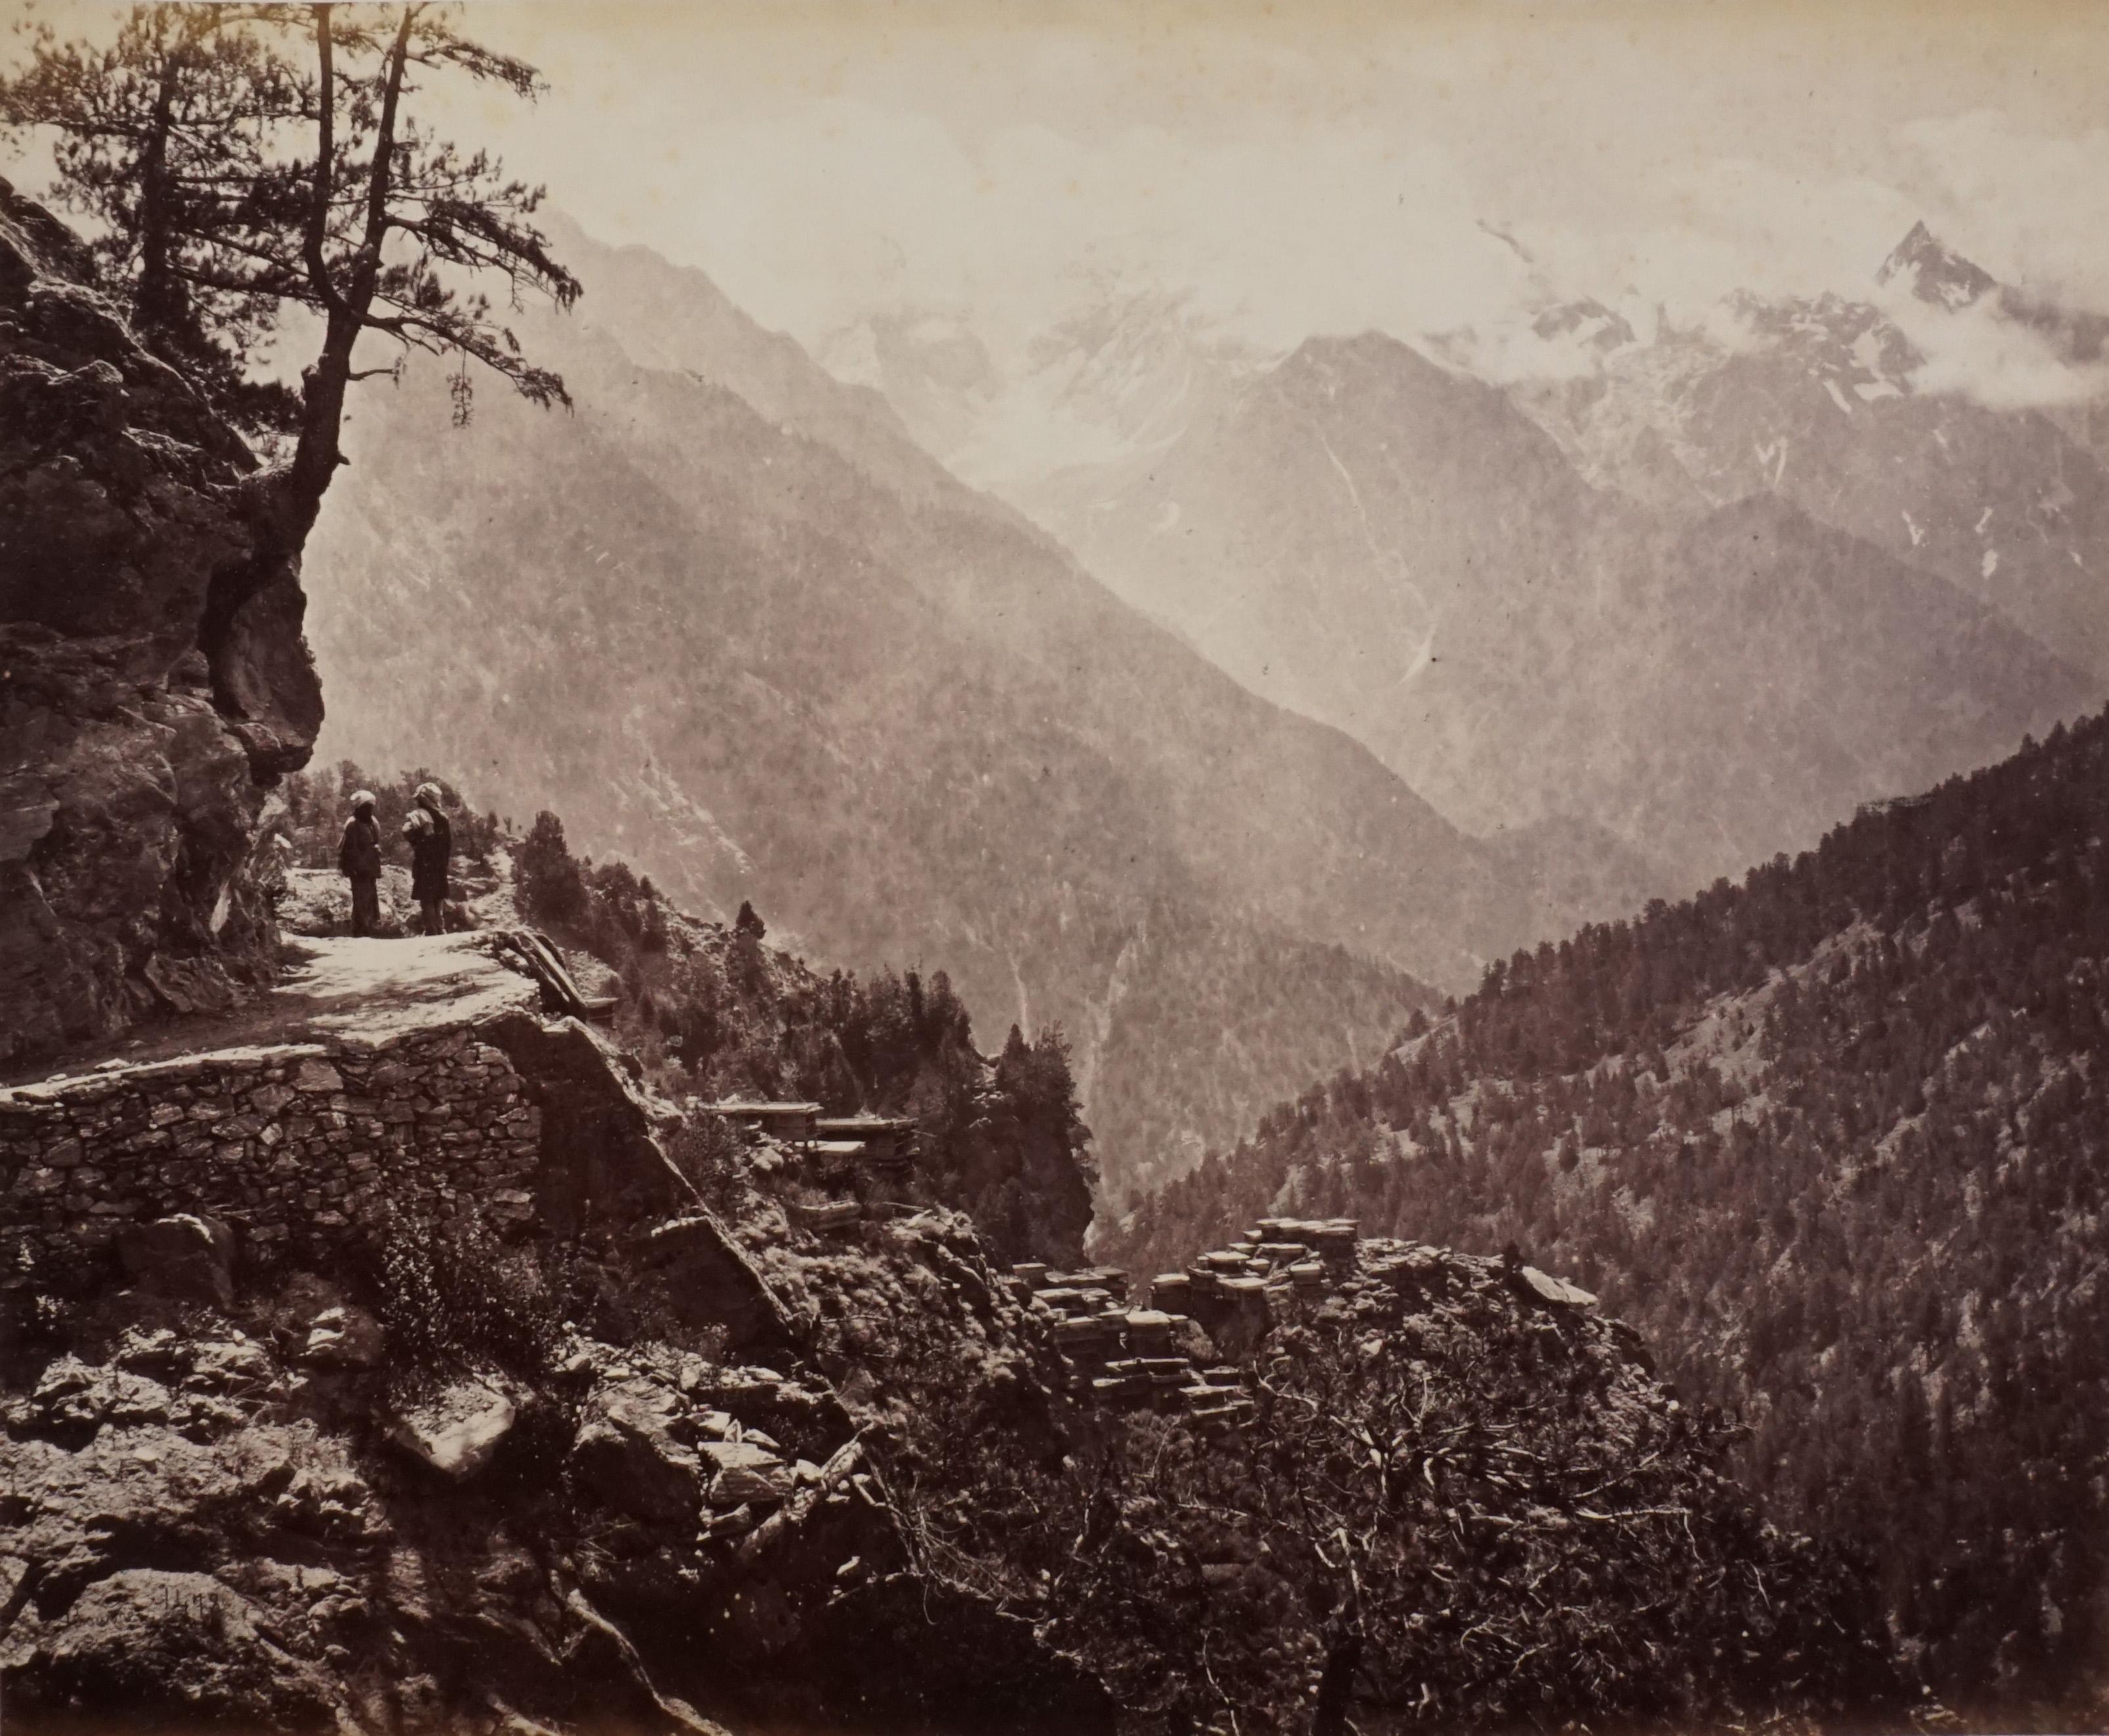 Samuel Bourne Black and White Photograph - The View from the new road at Pangi, #1478, 1866